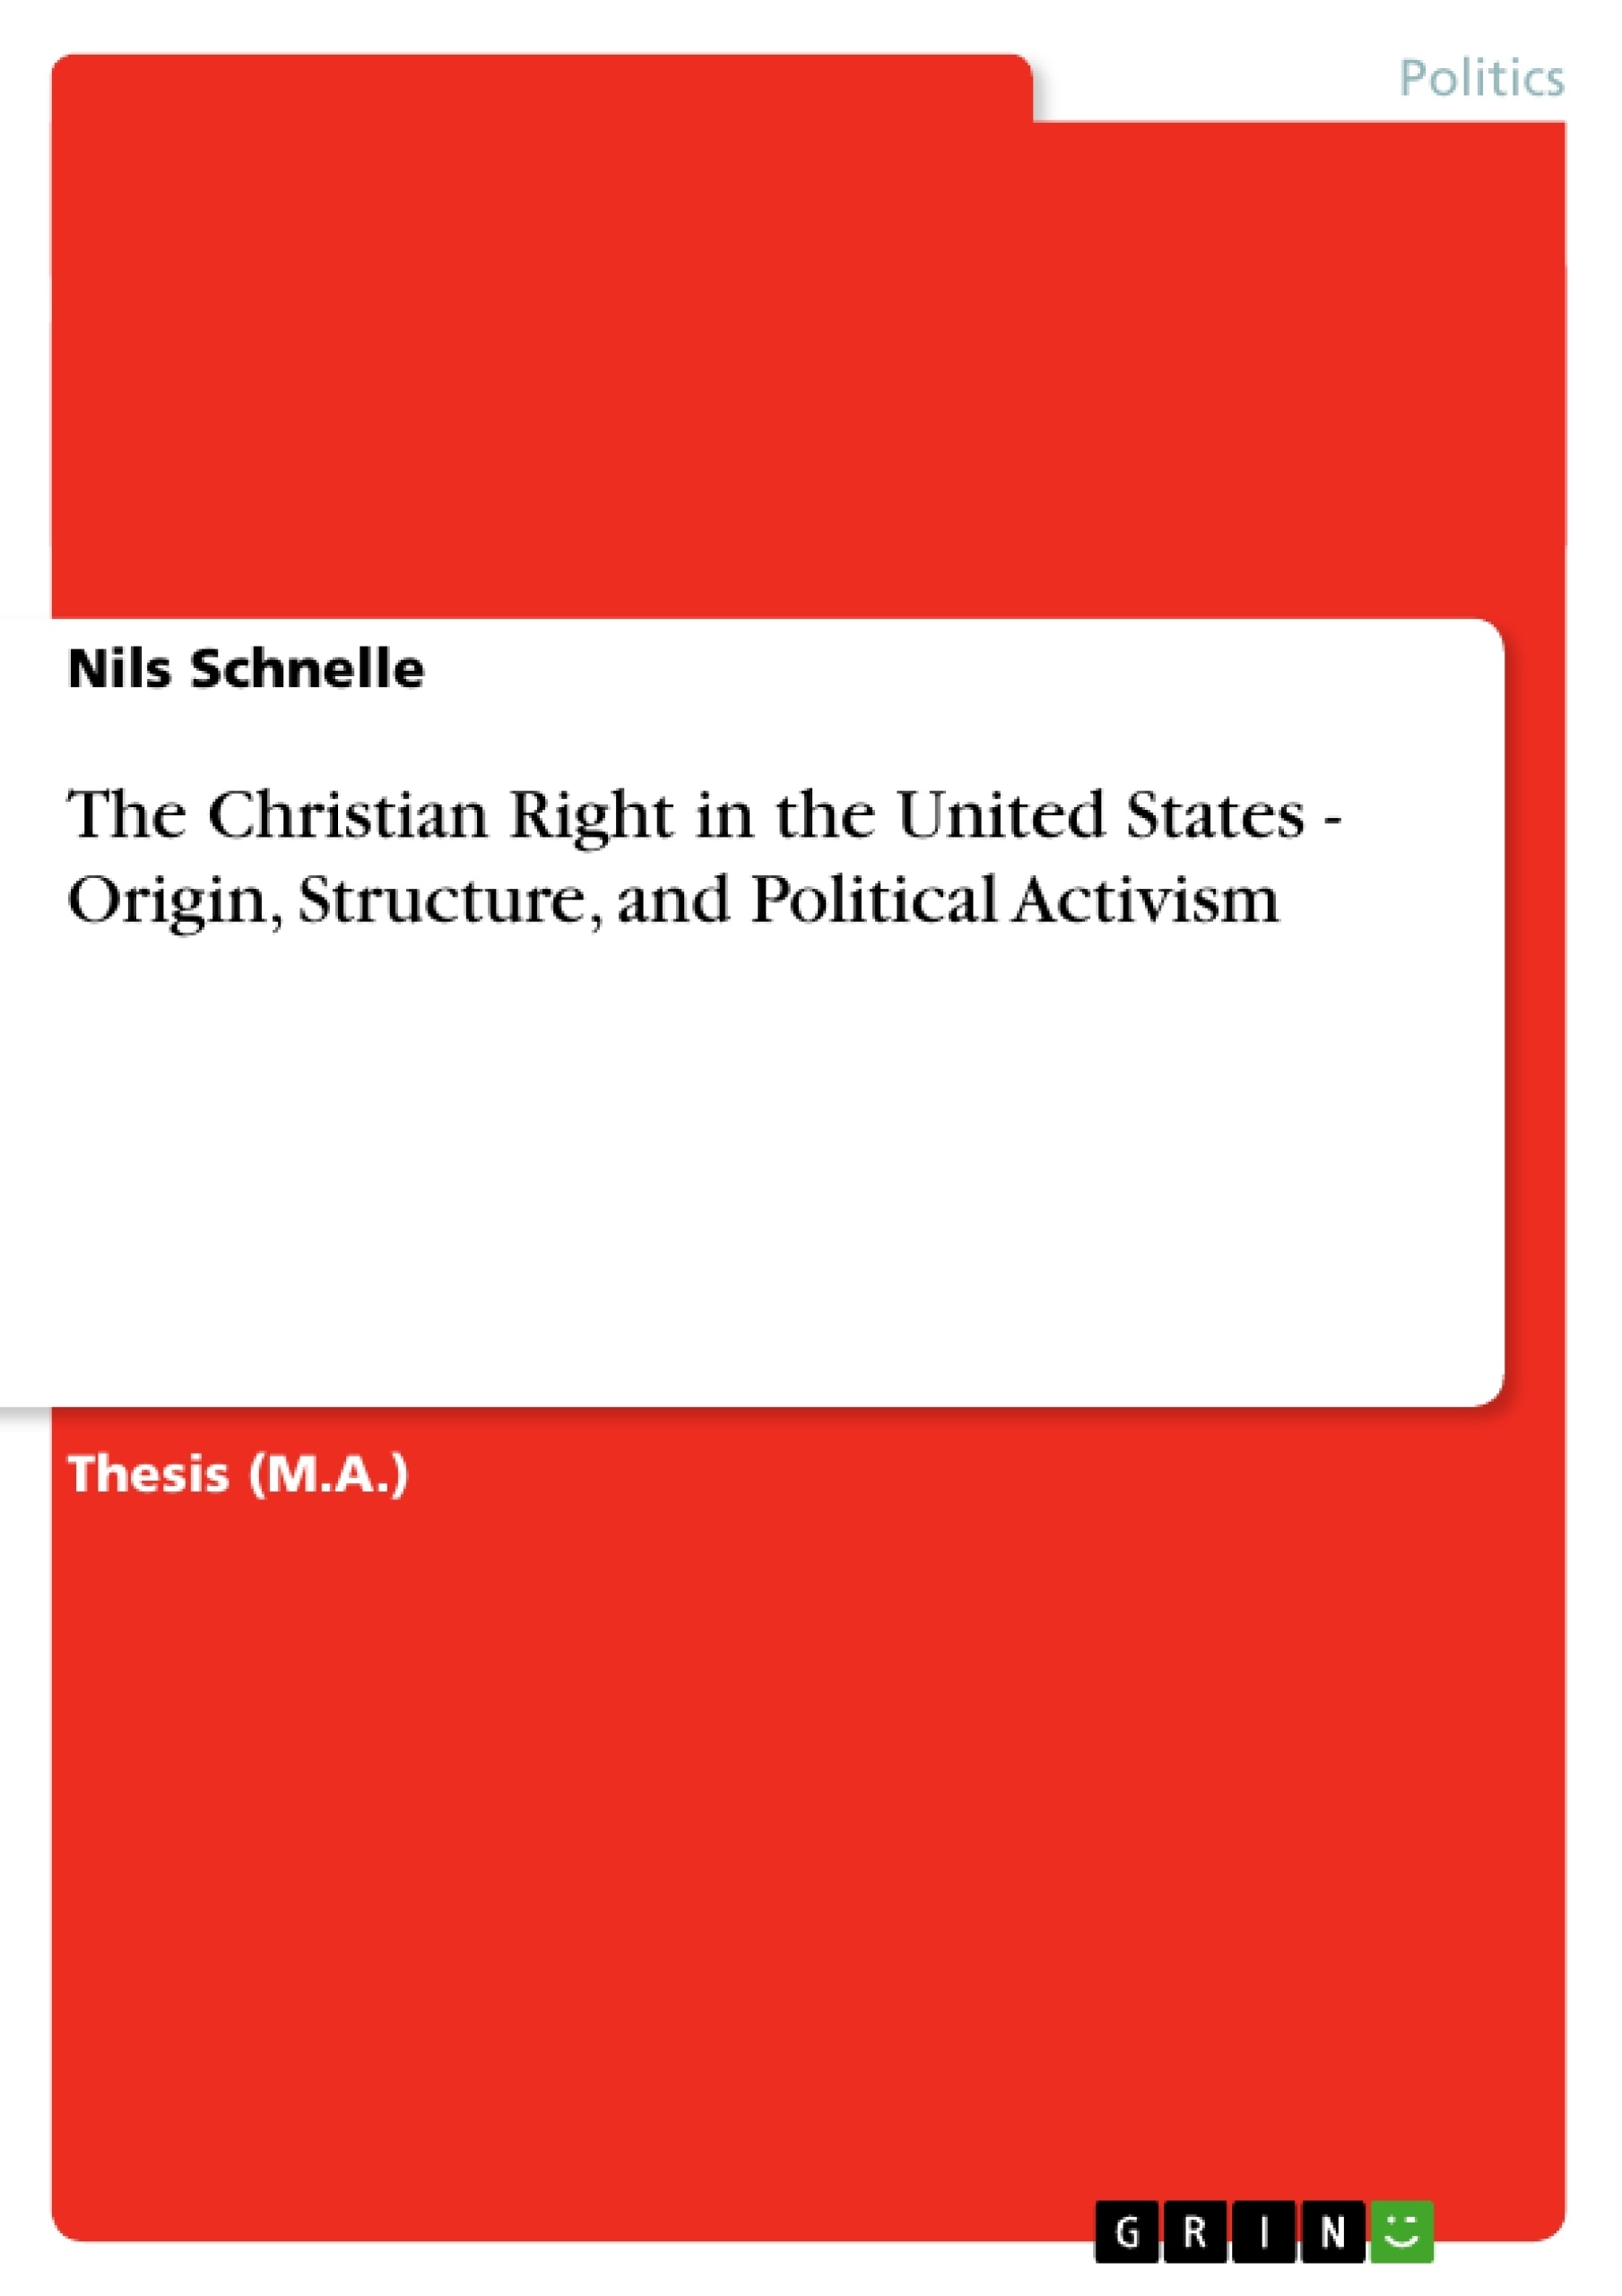 Titre: The Christian Right in the United States - Origin, Structure, and Political Activism